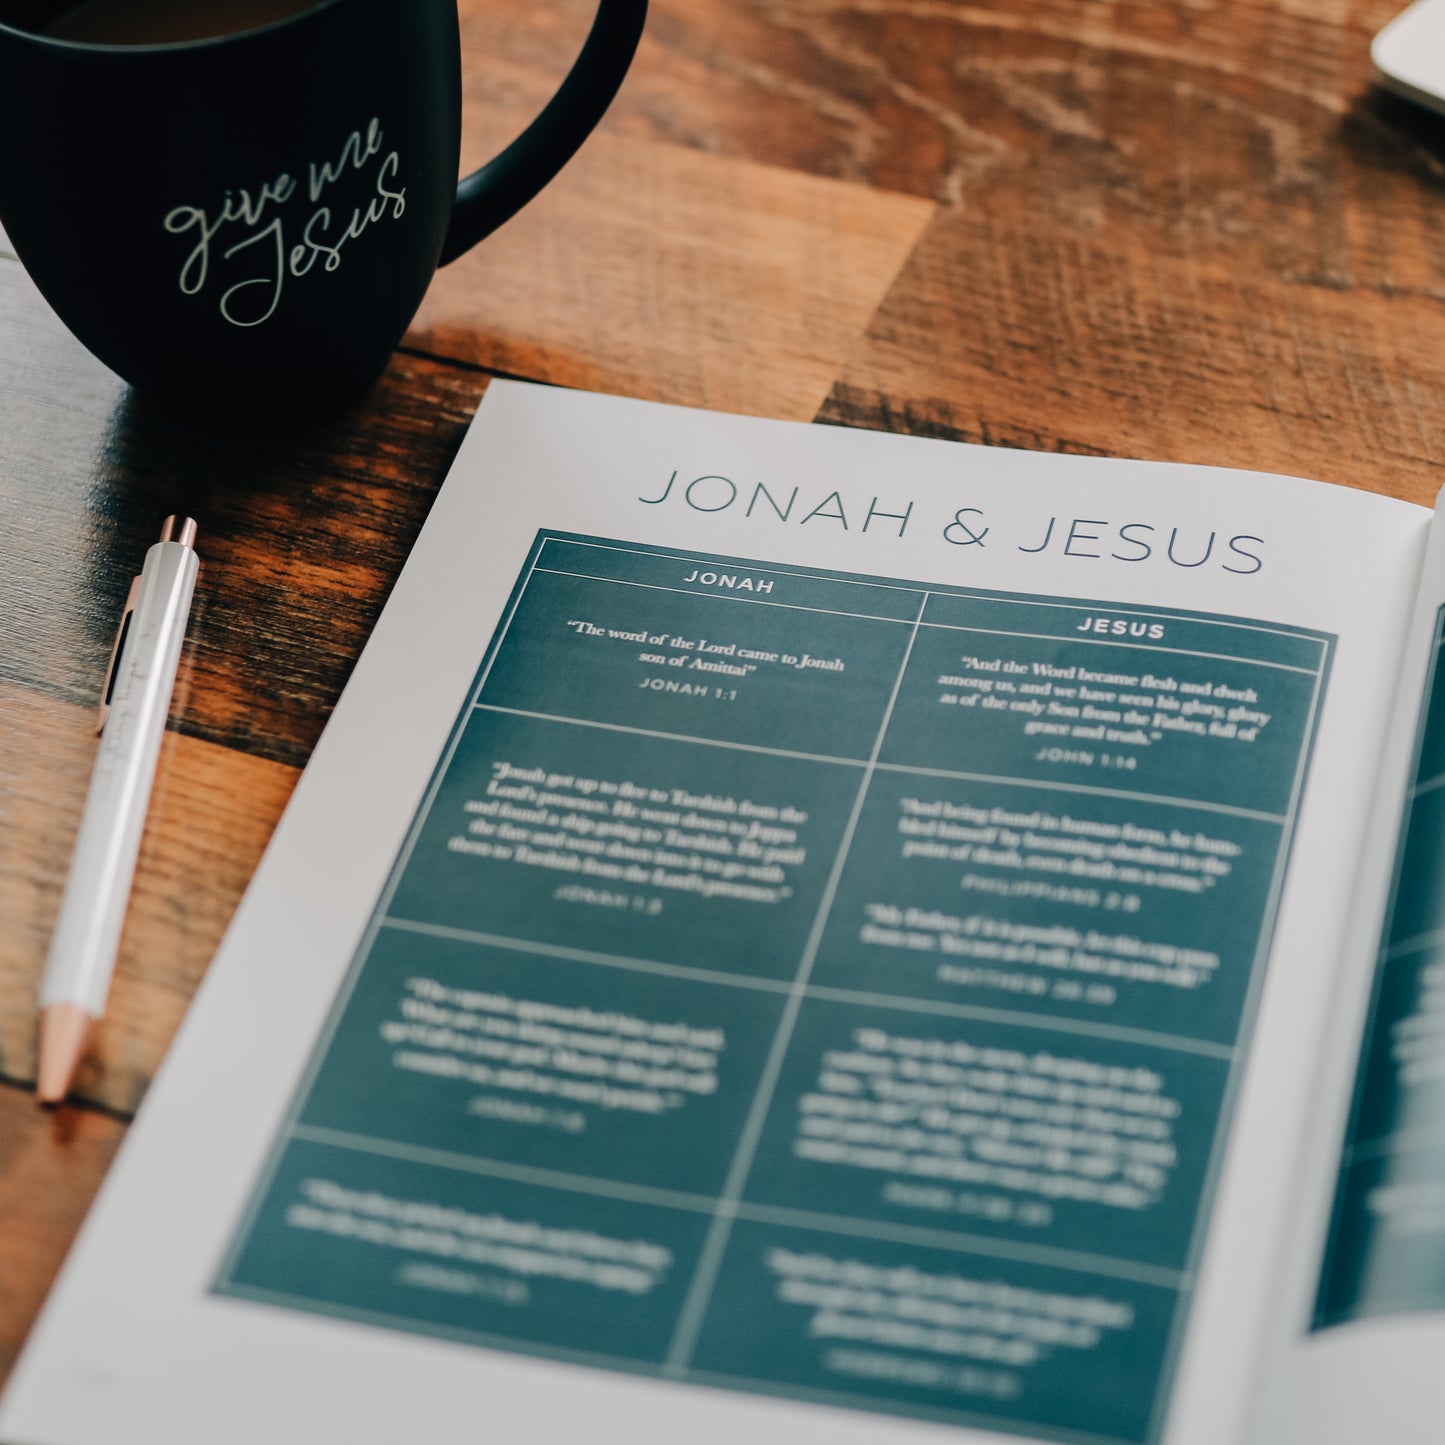 Mercy in the Storm - a Study on the Book of Jonah - Men